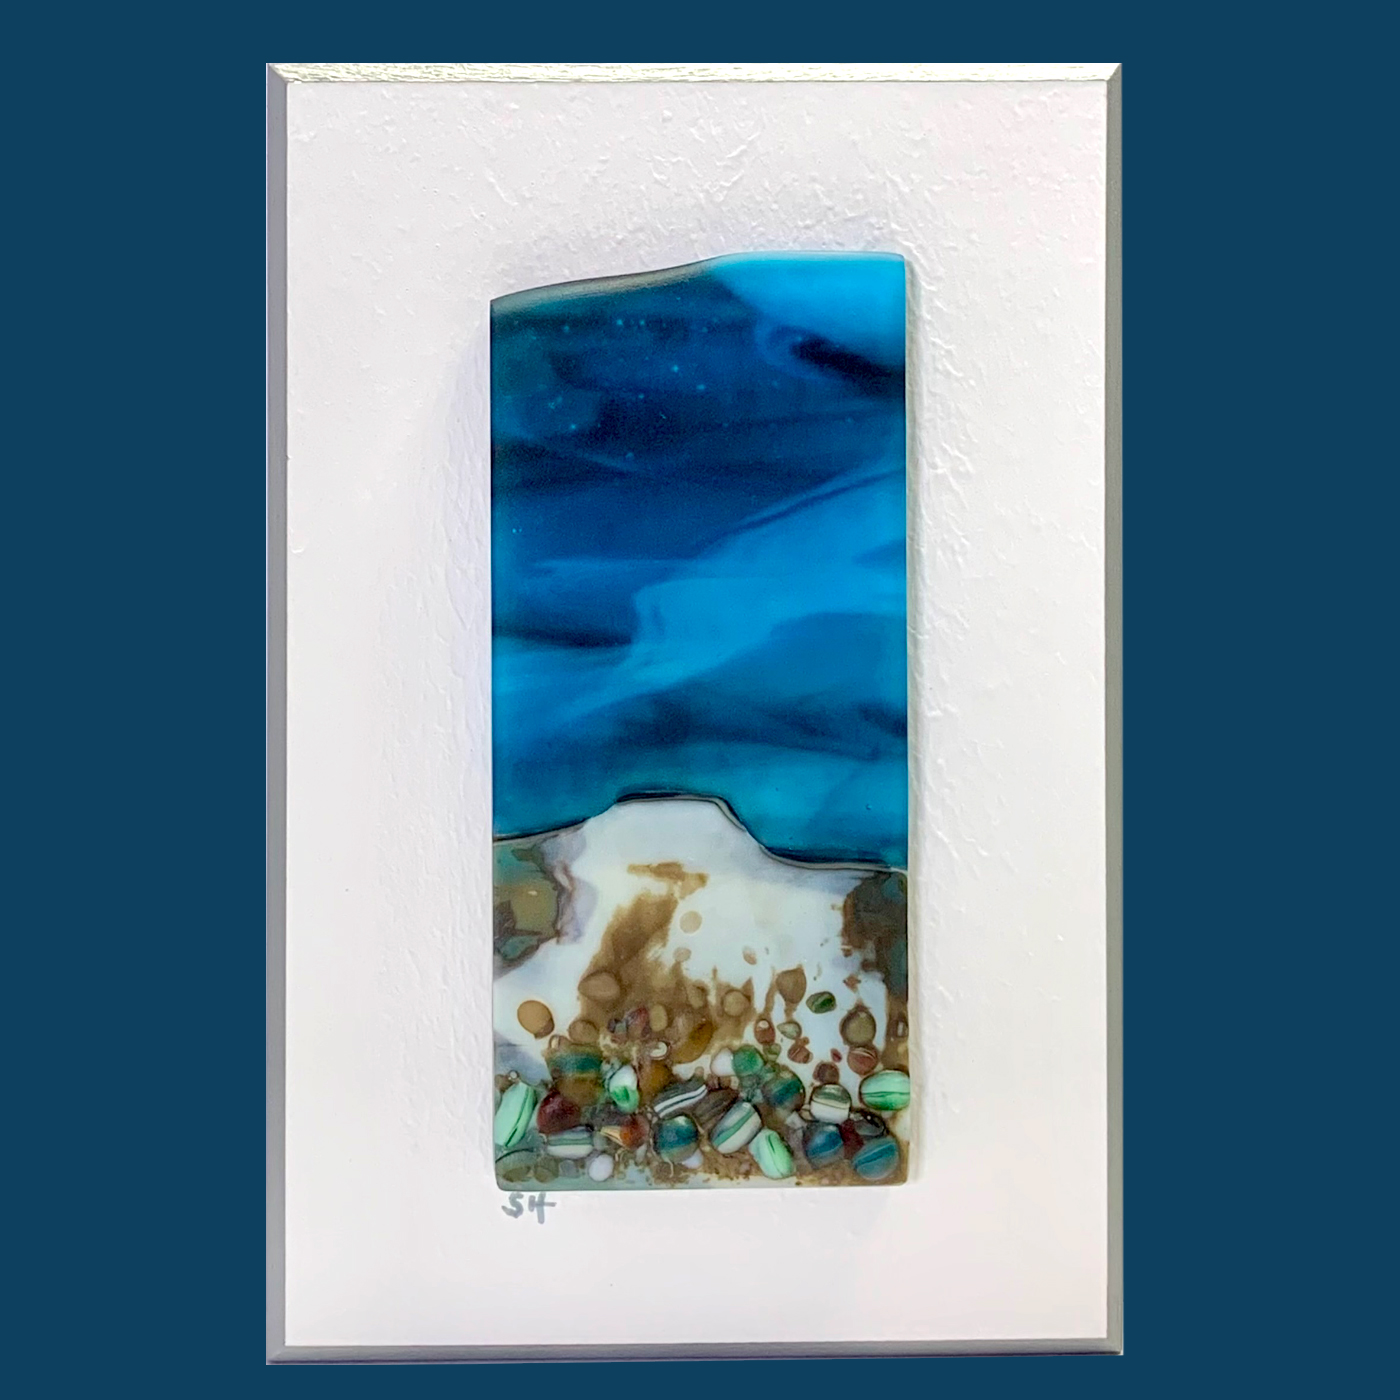 Seascapes fused glass wall art - light blue sky, vanilla/greens/brown and pale blue/cranberry pebbles in landscape.